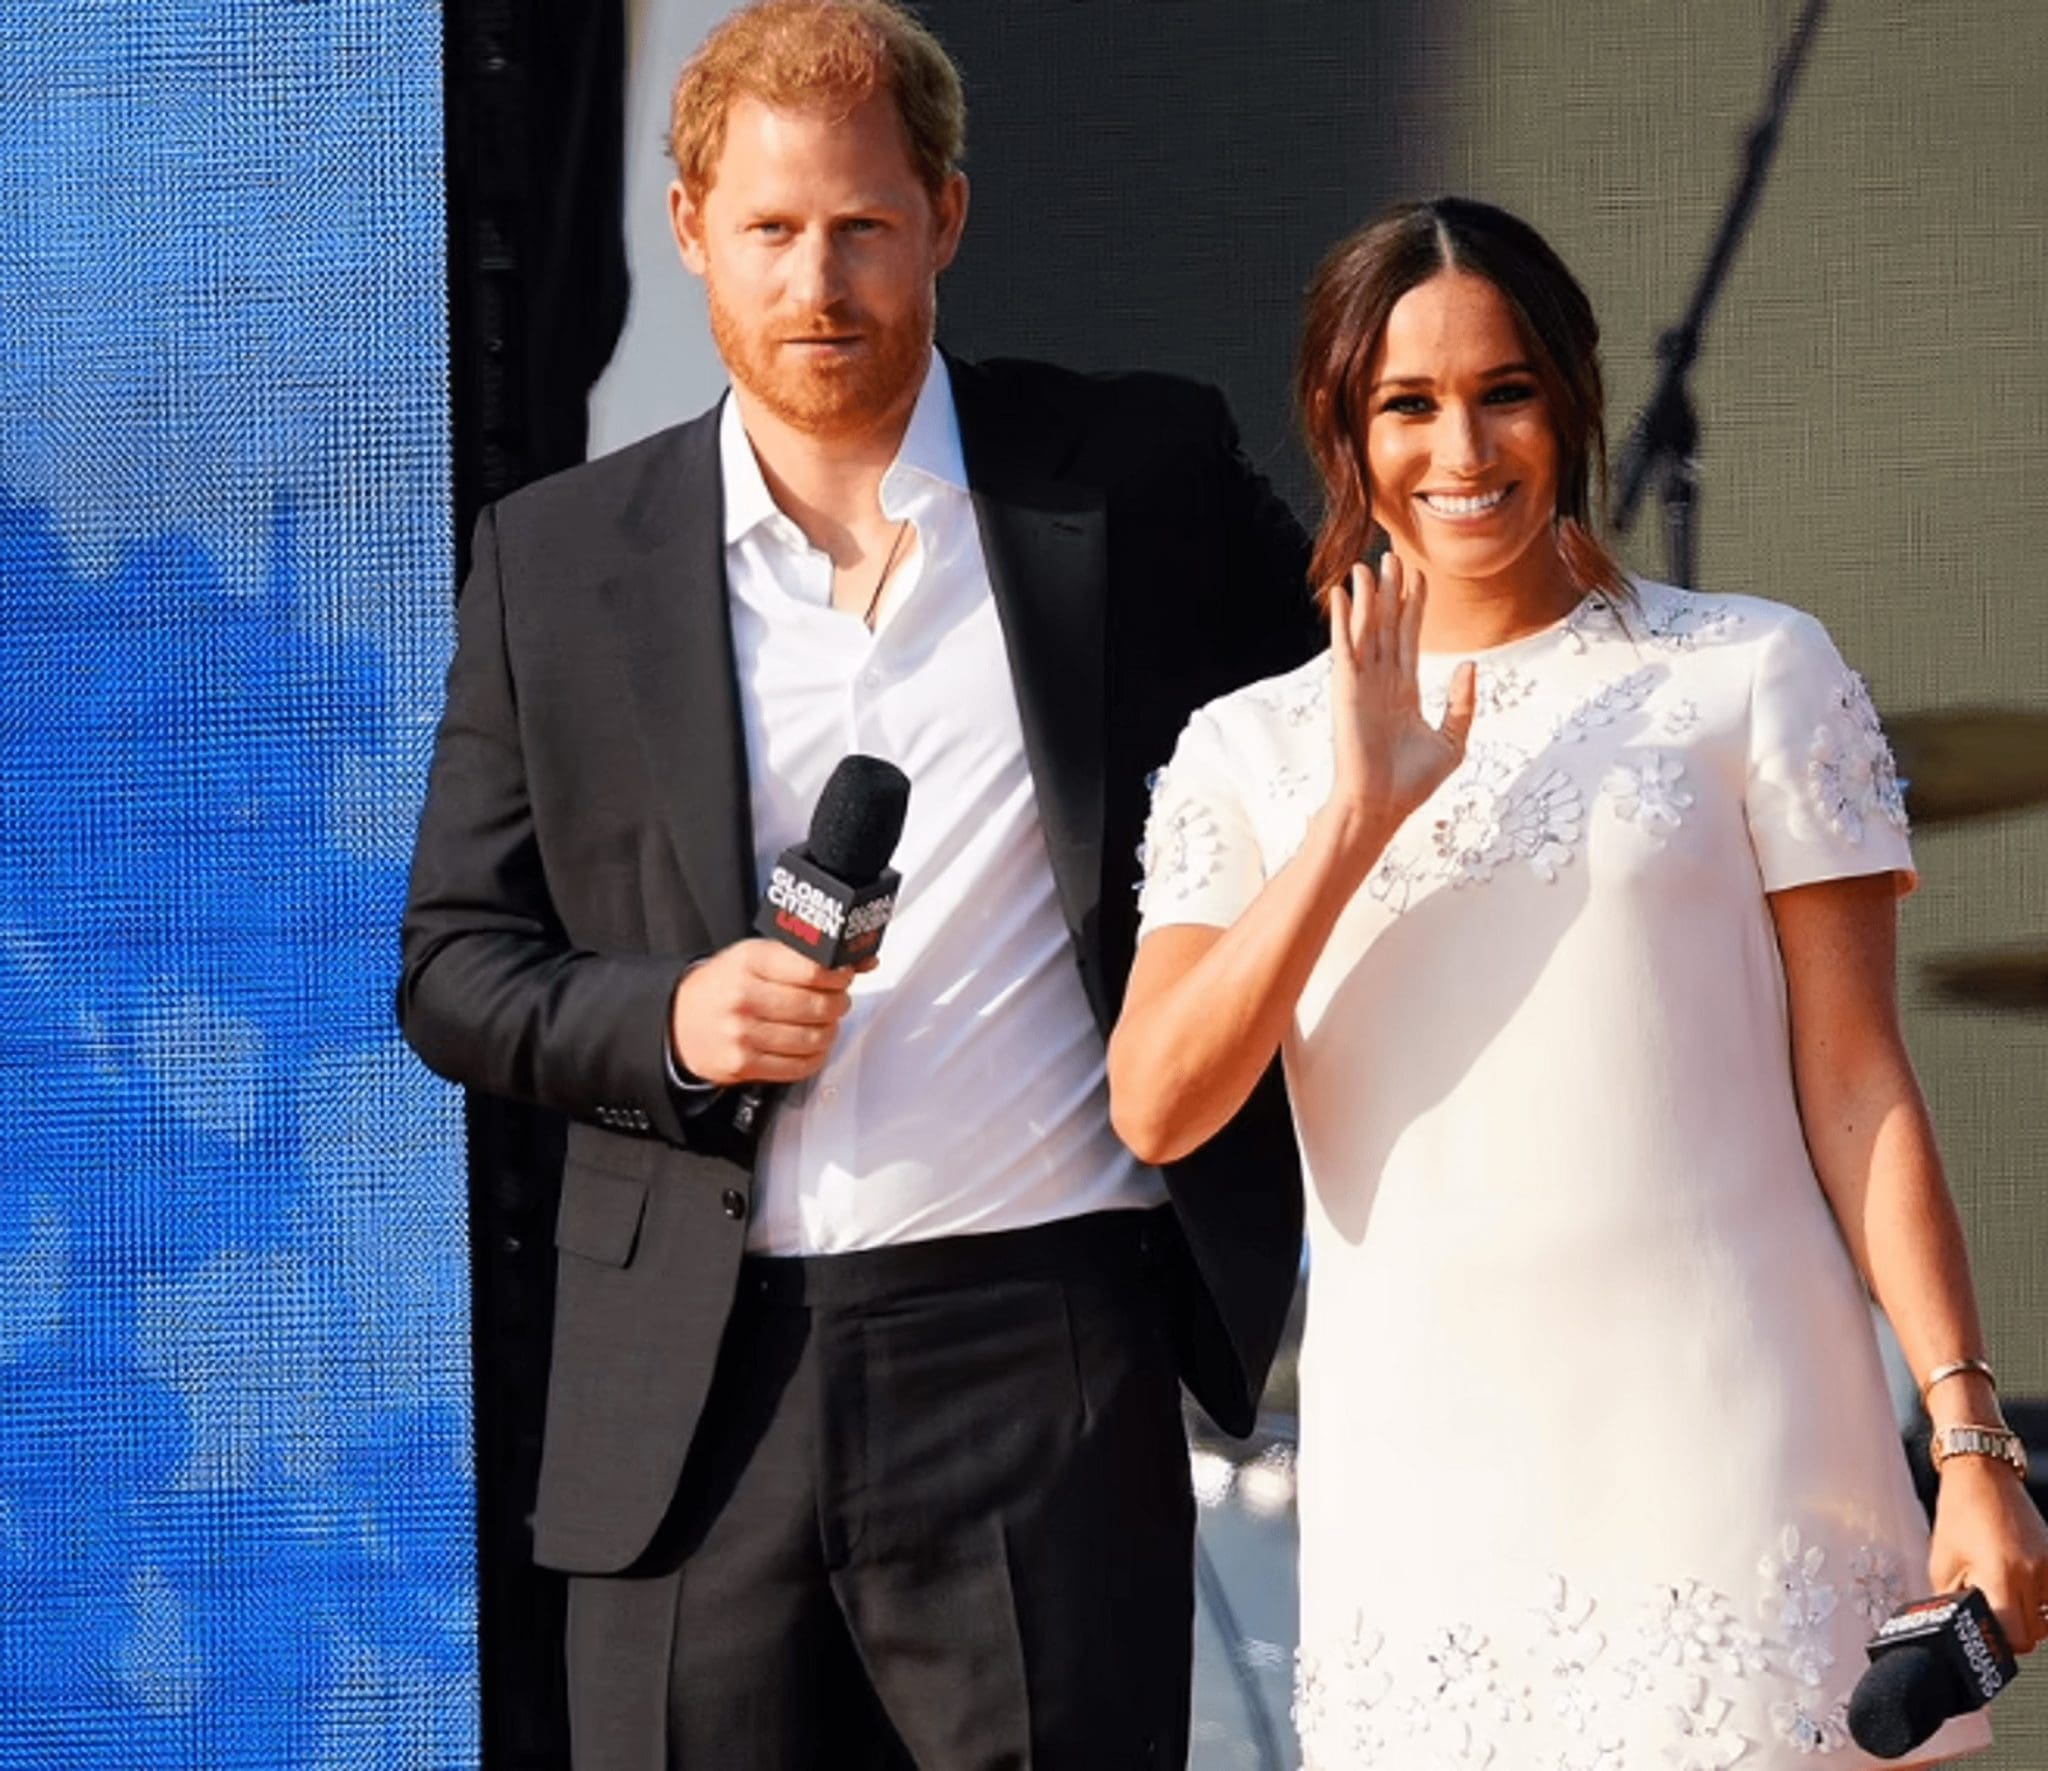 Prince Harry and Meghan Markle were incensed by the finding of the court in the case 'Roe v. Wade'